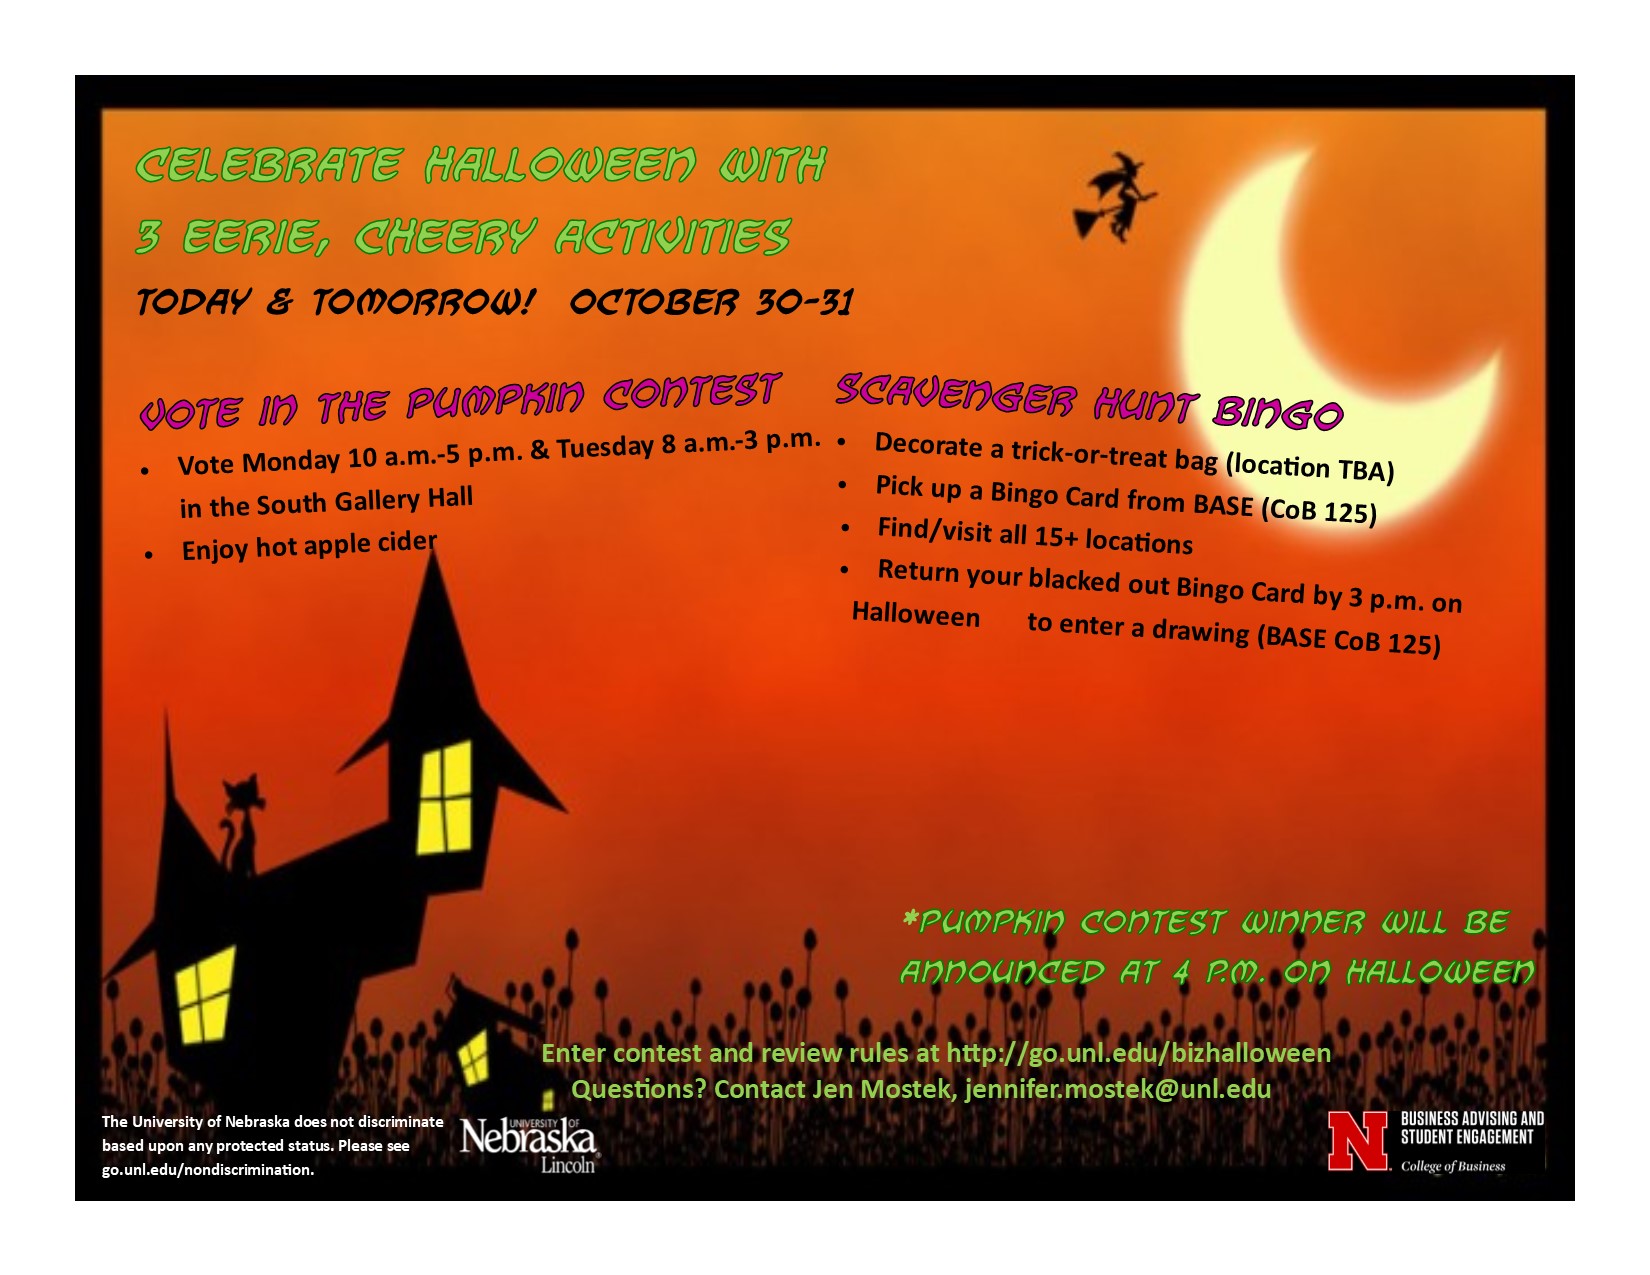 Celebrate Halloween in the College of Business!